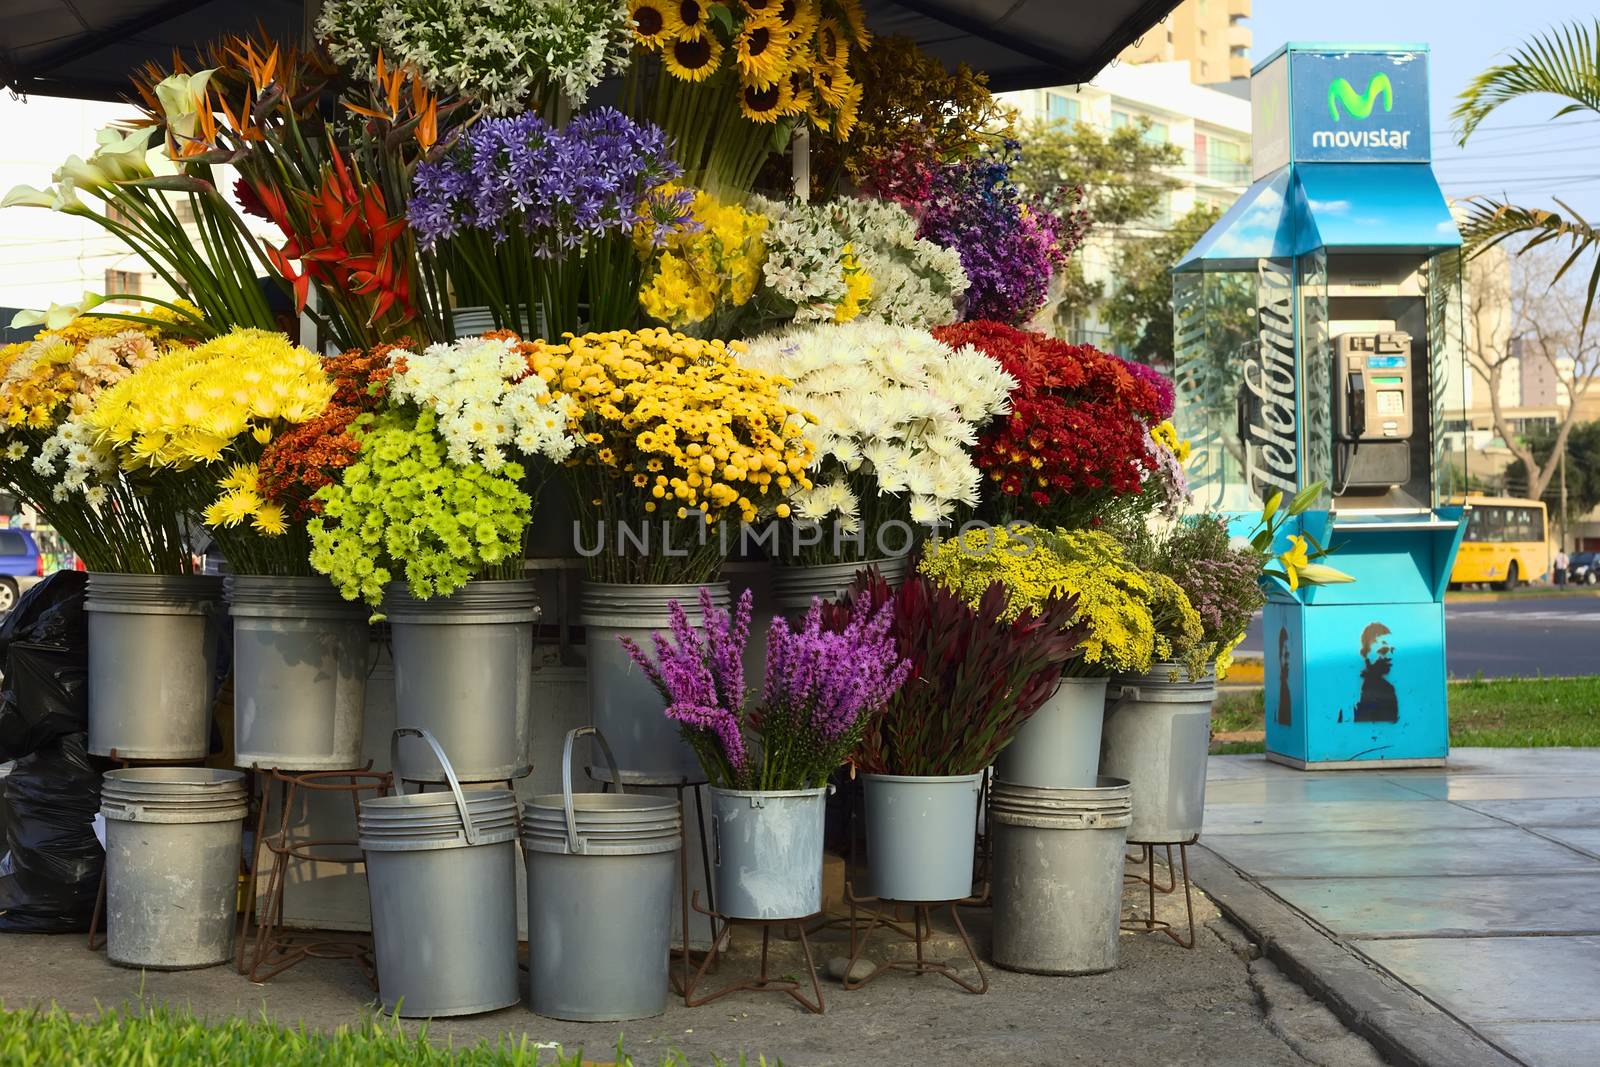 LIMA, PERU - MAY 7, 2012: Flower stand and public phone booth at the corner of the avenues Reducto and 28 de Julio in the district of Miraflores on May 7, 2012 in Lima, Peru.